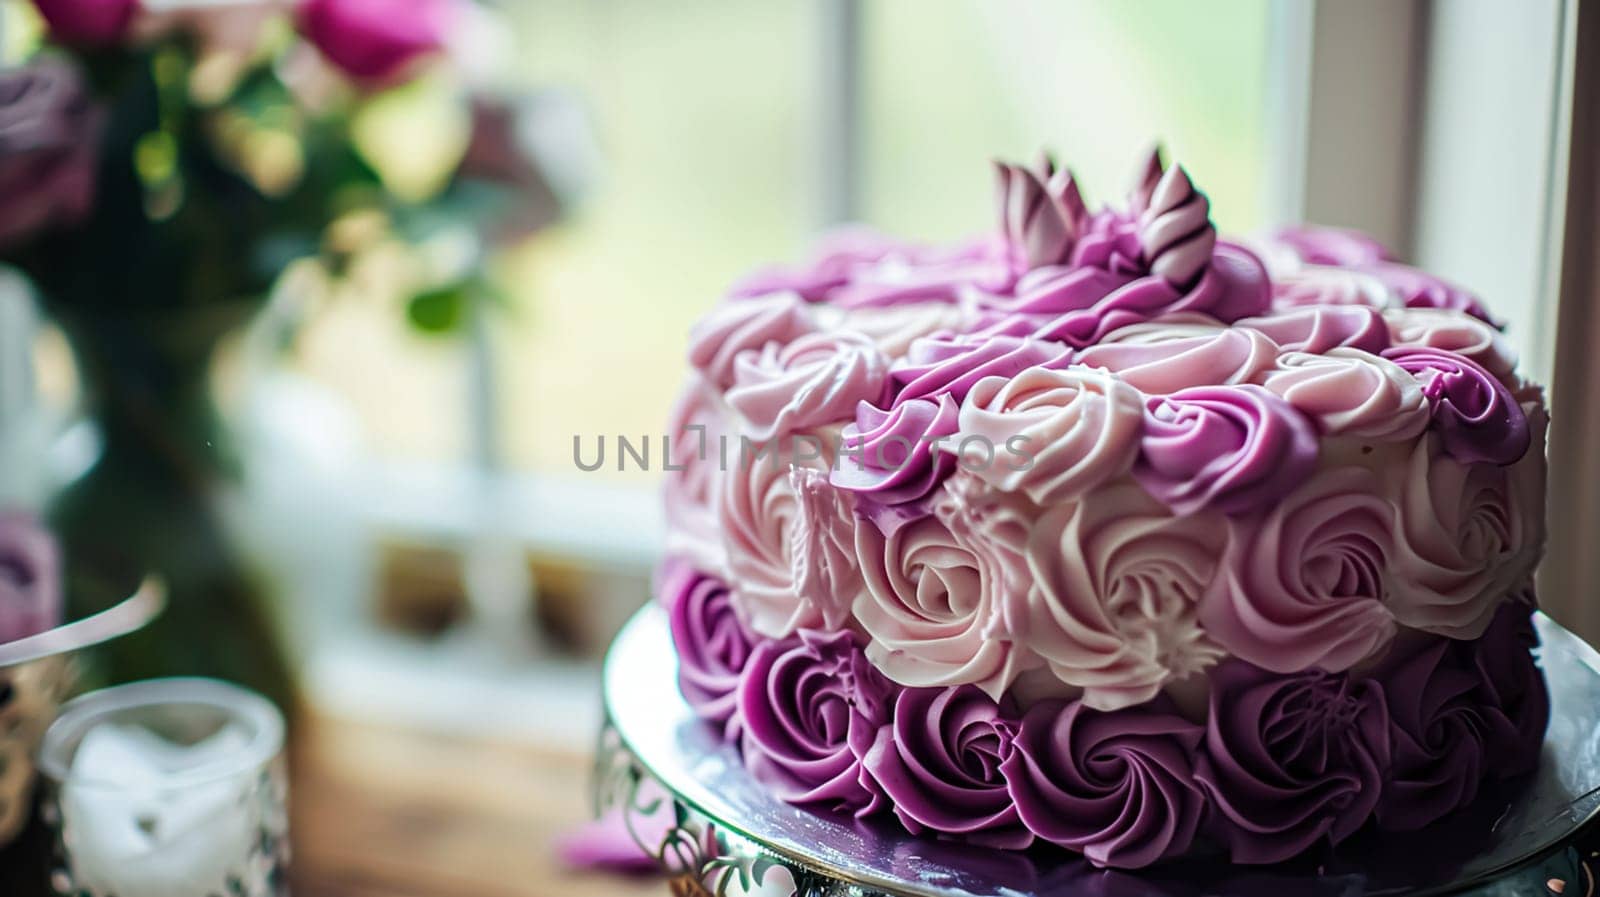 Birthday cake with candles and flowers on the table. Selective focus by Olayola